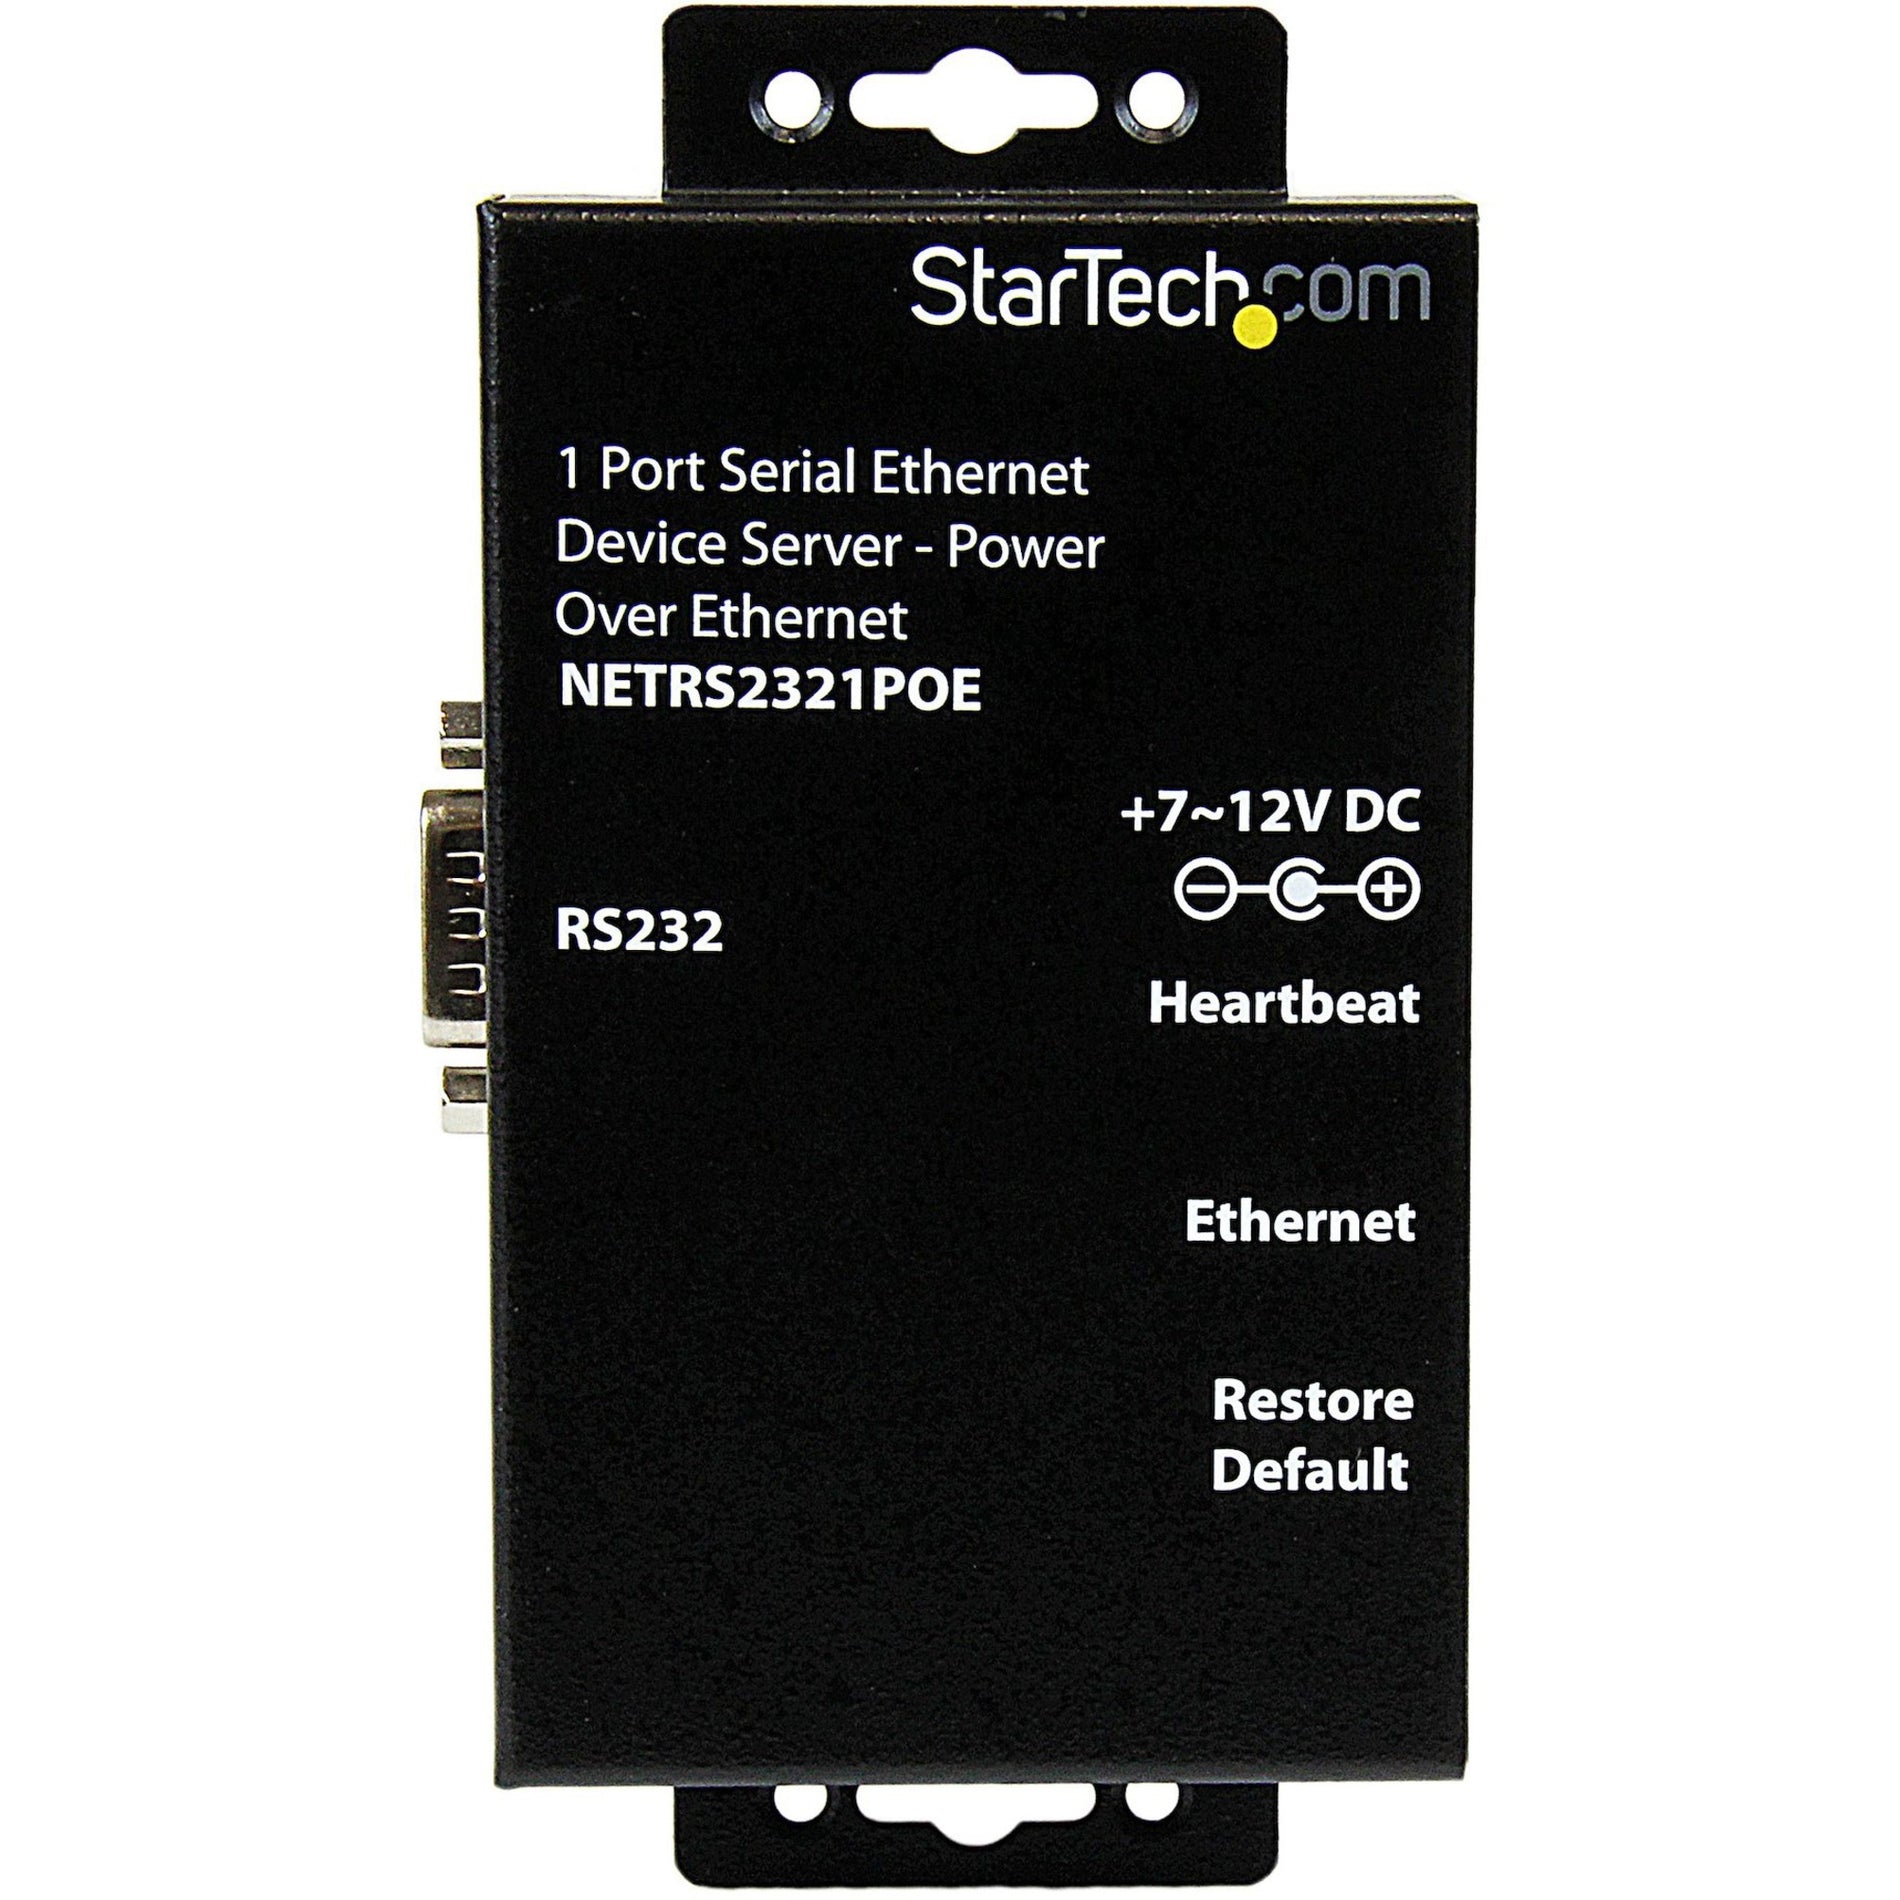 StarTech.com NETRS2321POE 1 Port RS232 Serial Ethernet Device Server - PoE Power Over Ethernet TAA Compliant 2 Year Warranty [Discontinued]